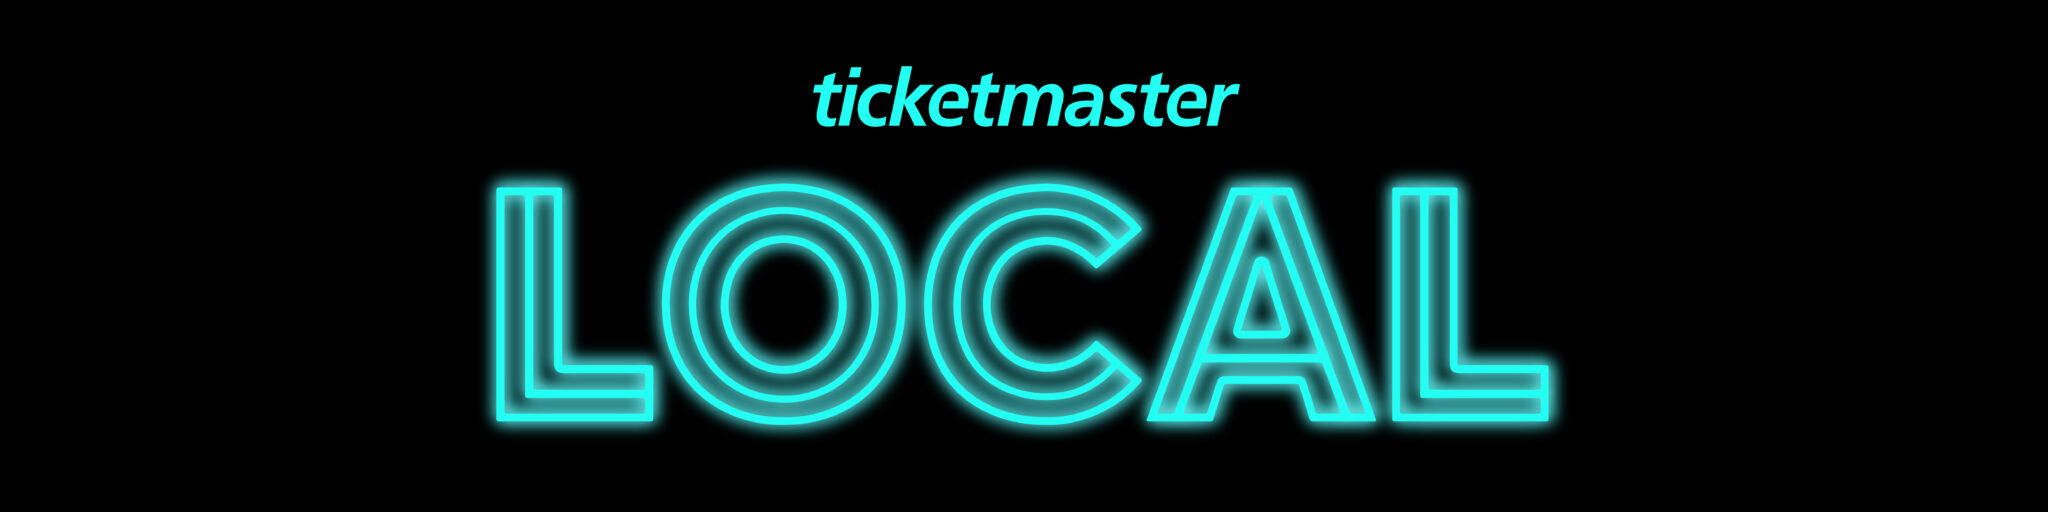 Ticketmaster Local Official Ticketmaster Website TM Guides